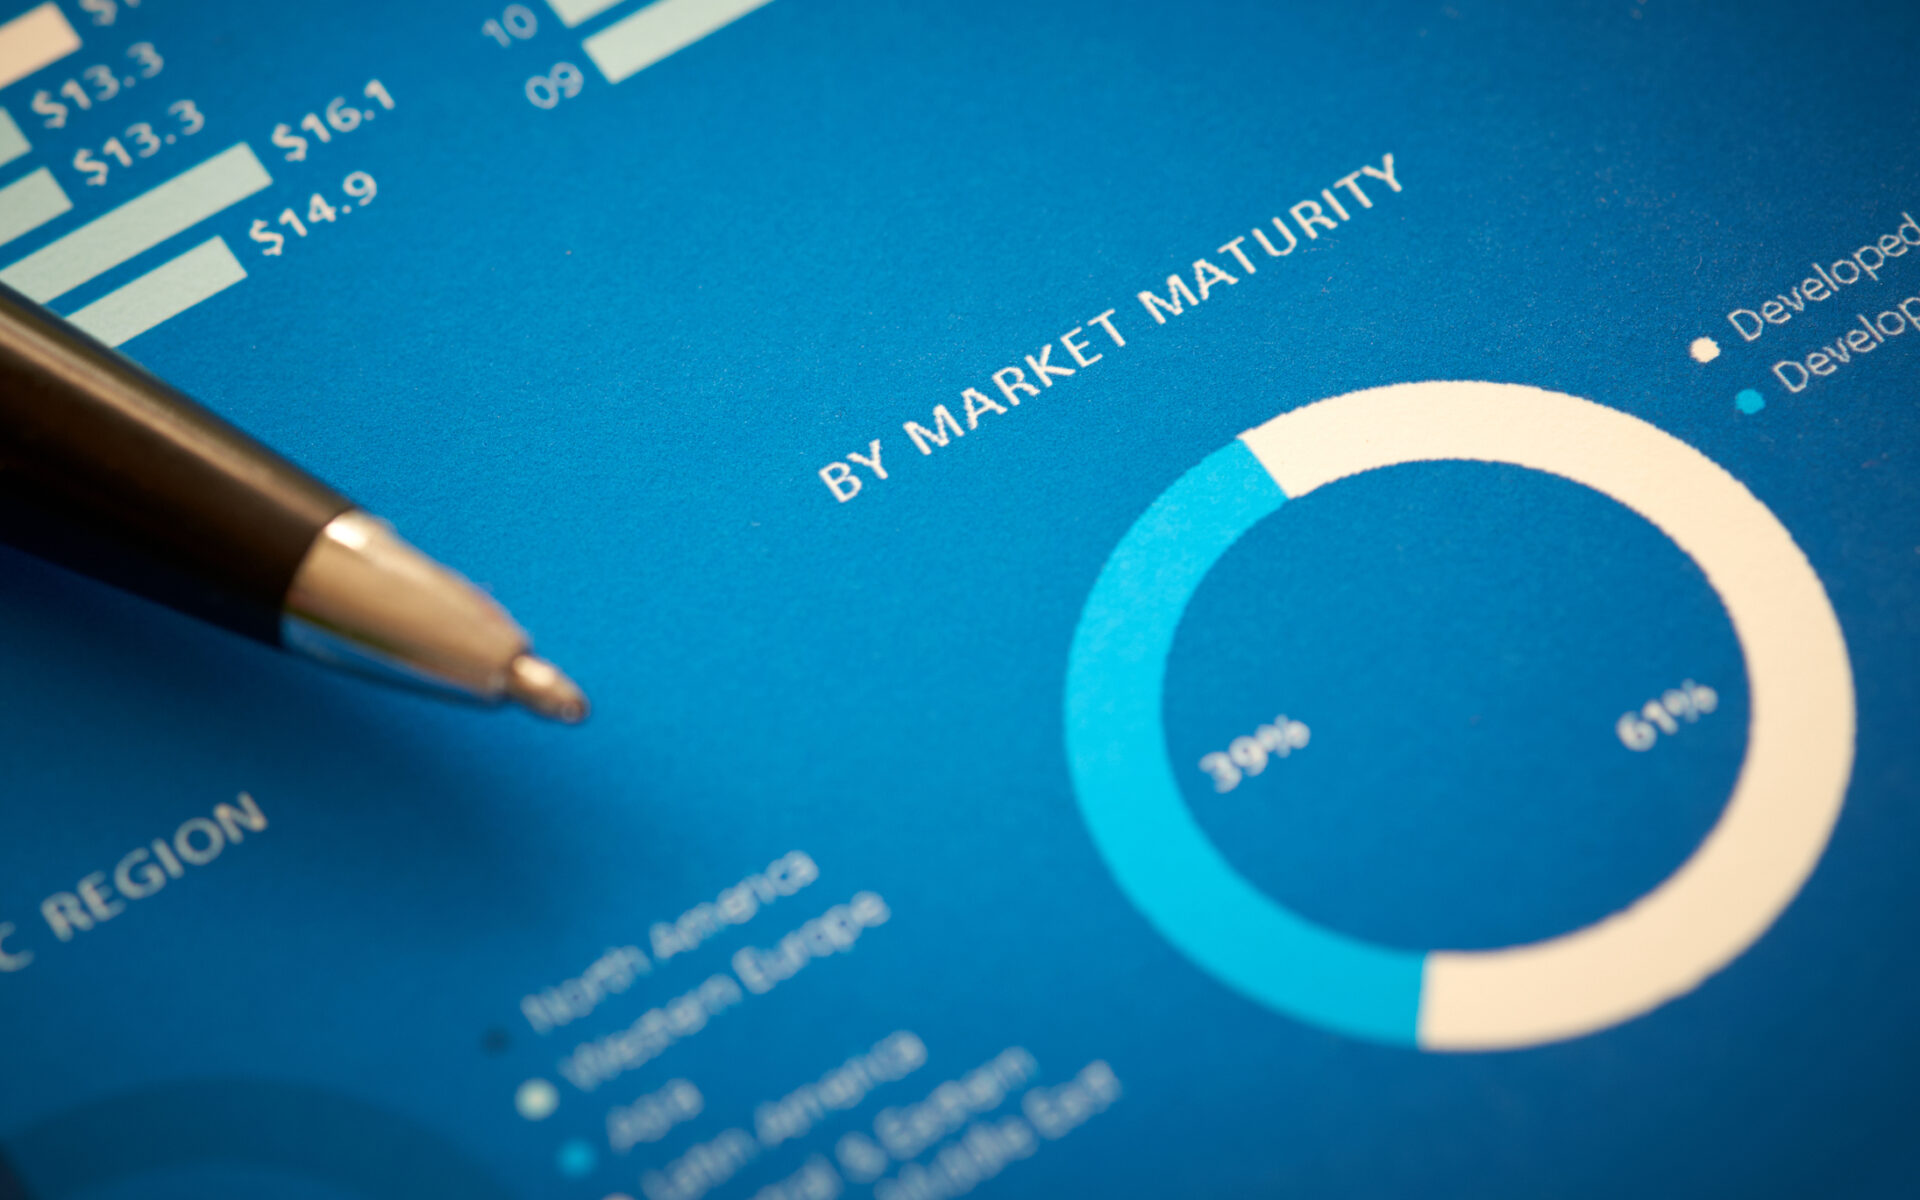 A close up of a business annual report on market maturity.